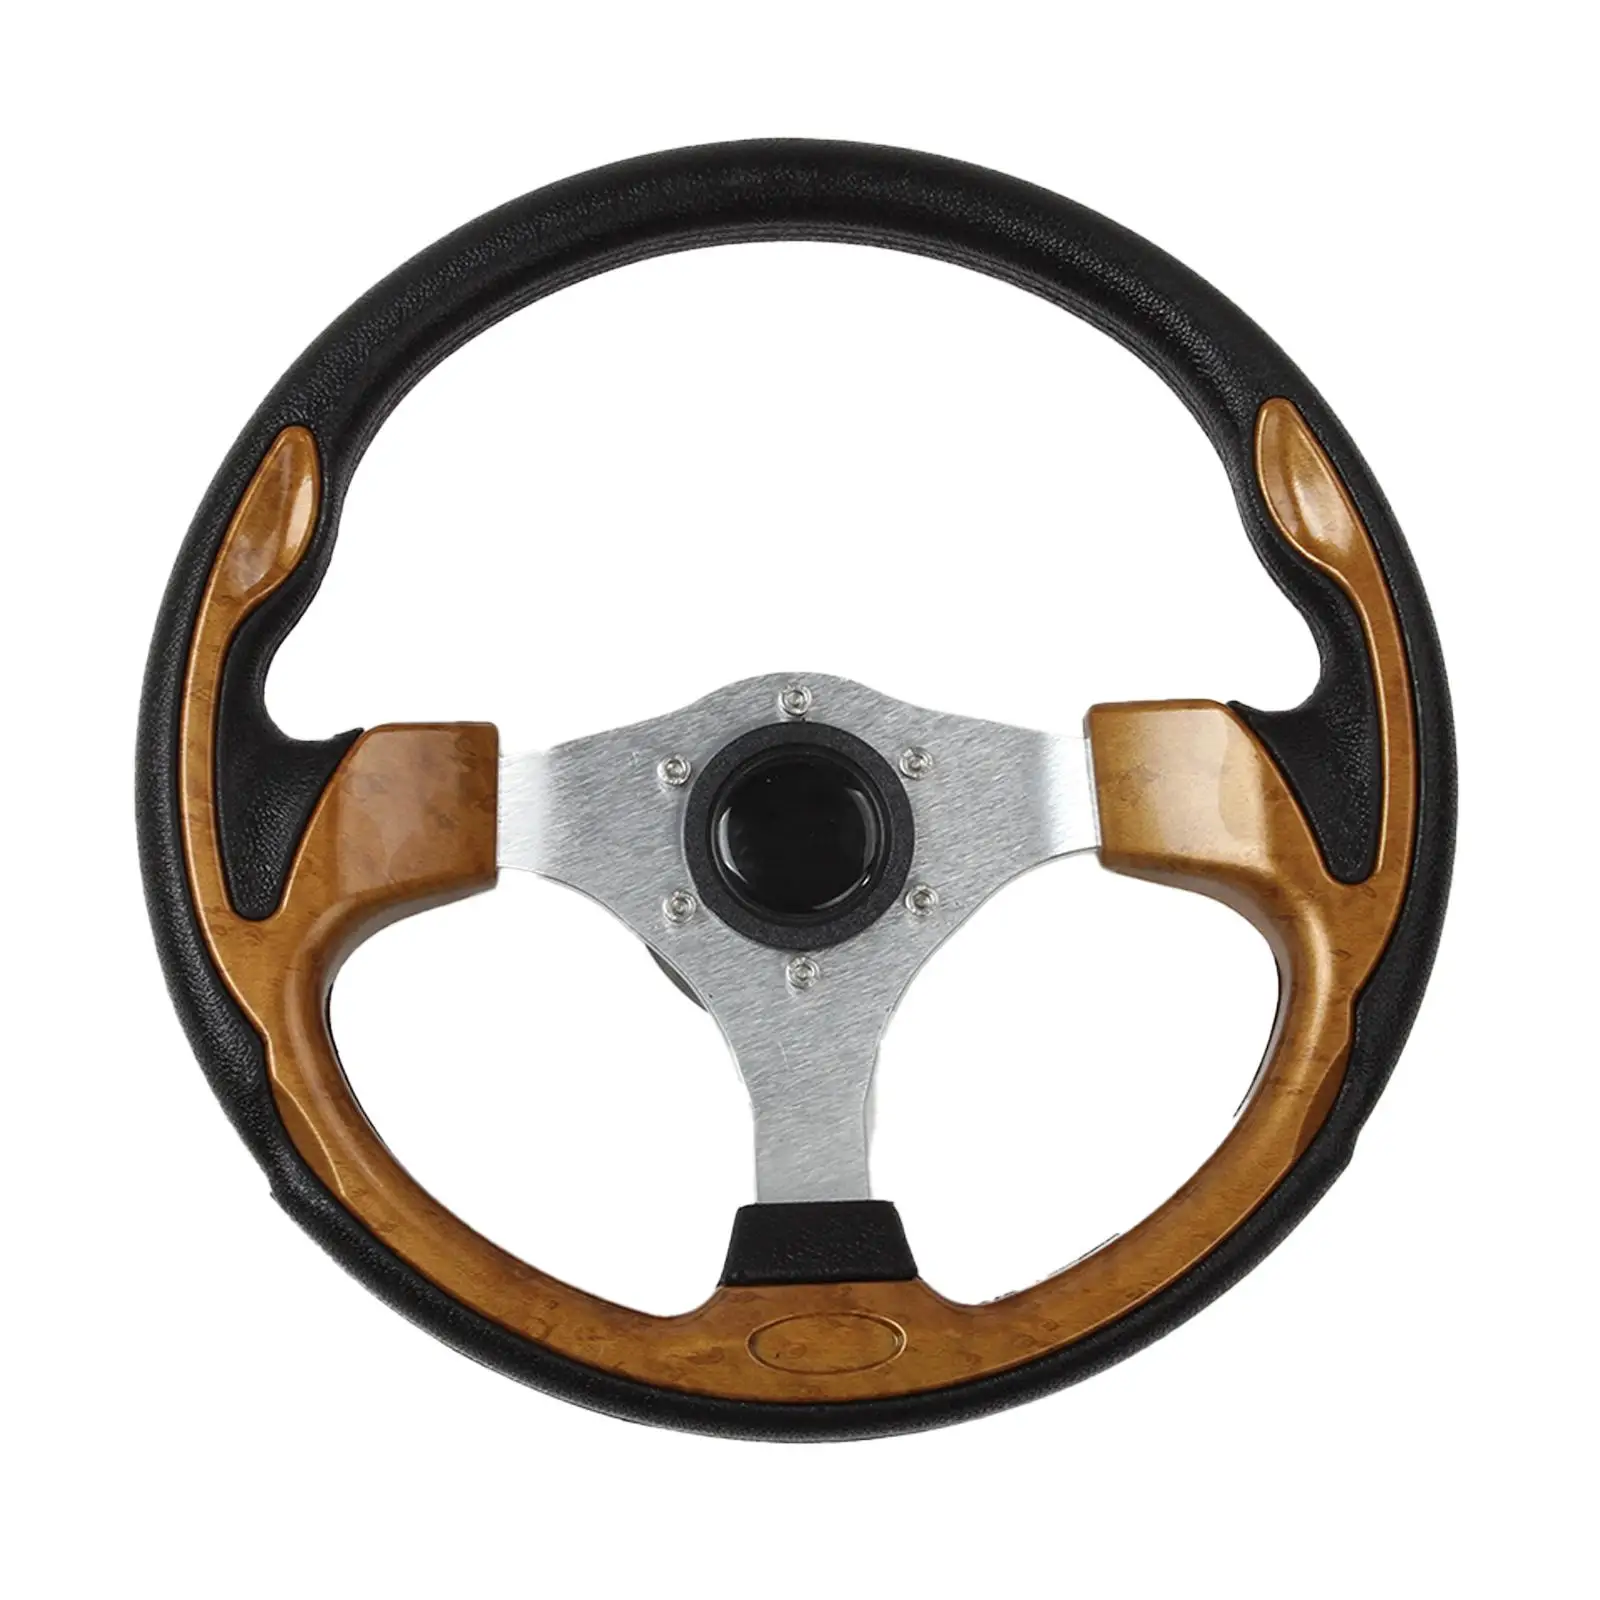 Marine Boat Steering Wheel Comfortable to Grip Accessory 3 Spokes for Pontoon Boats Yachts Marine Boats Vessels Attachments